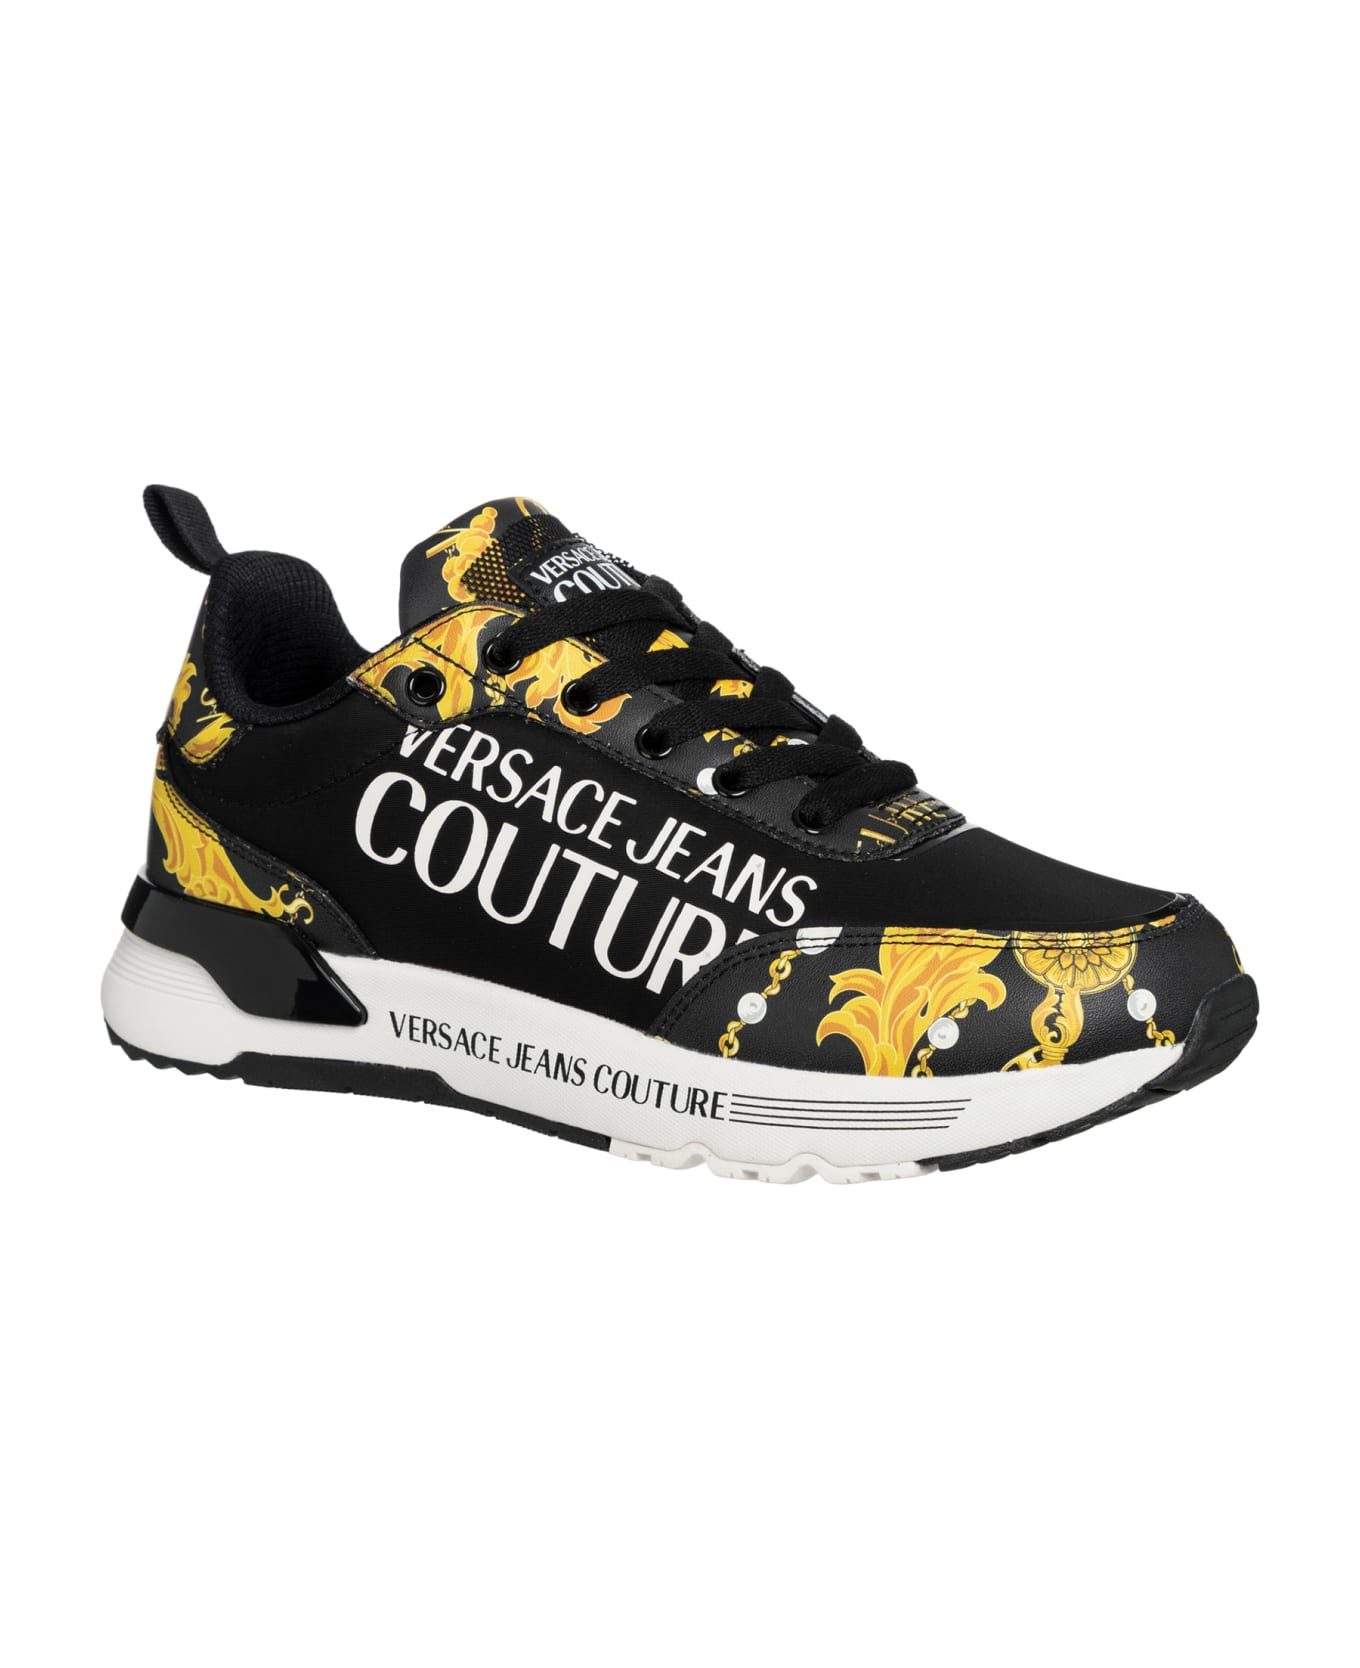 Versace Jeans Couture Dynamic Chain Couture Leather Sneakers - BLACK/GOLD スニーカー